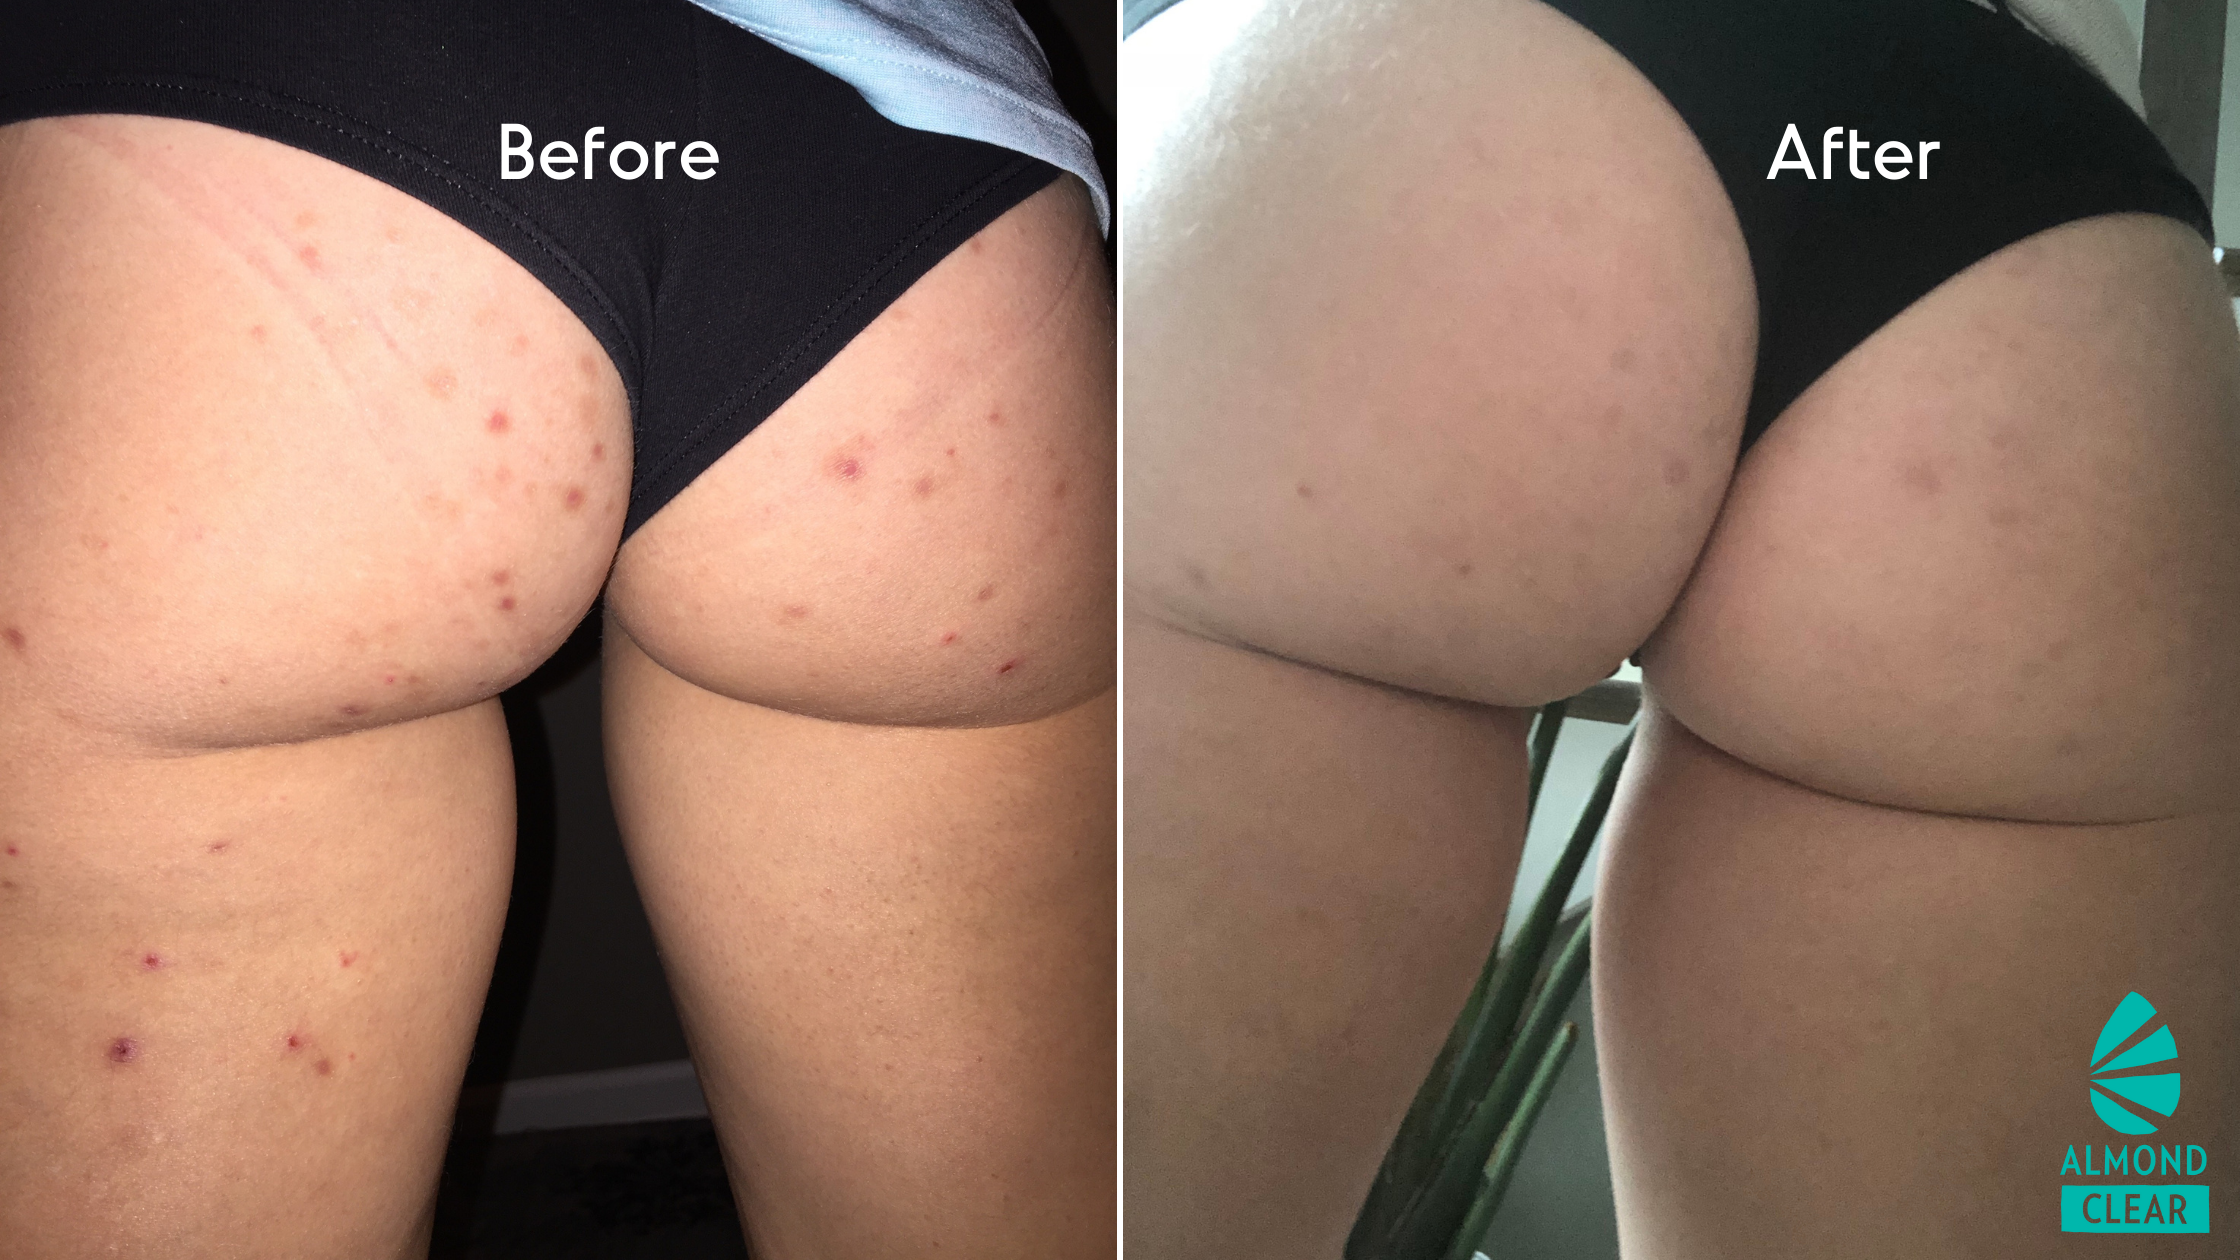 Bevise Utilgængelig passe Red Bumps on the Butt - Causes & Treatment | Almond Clear